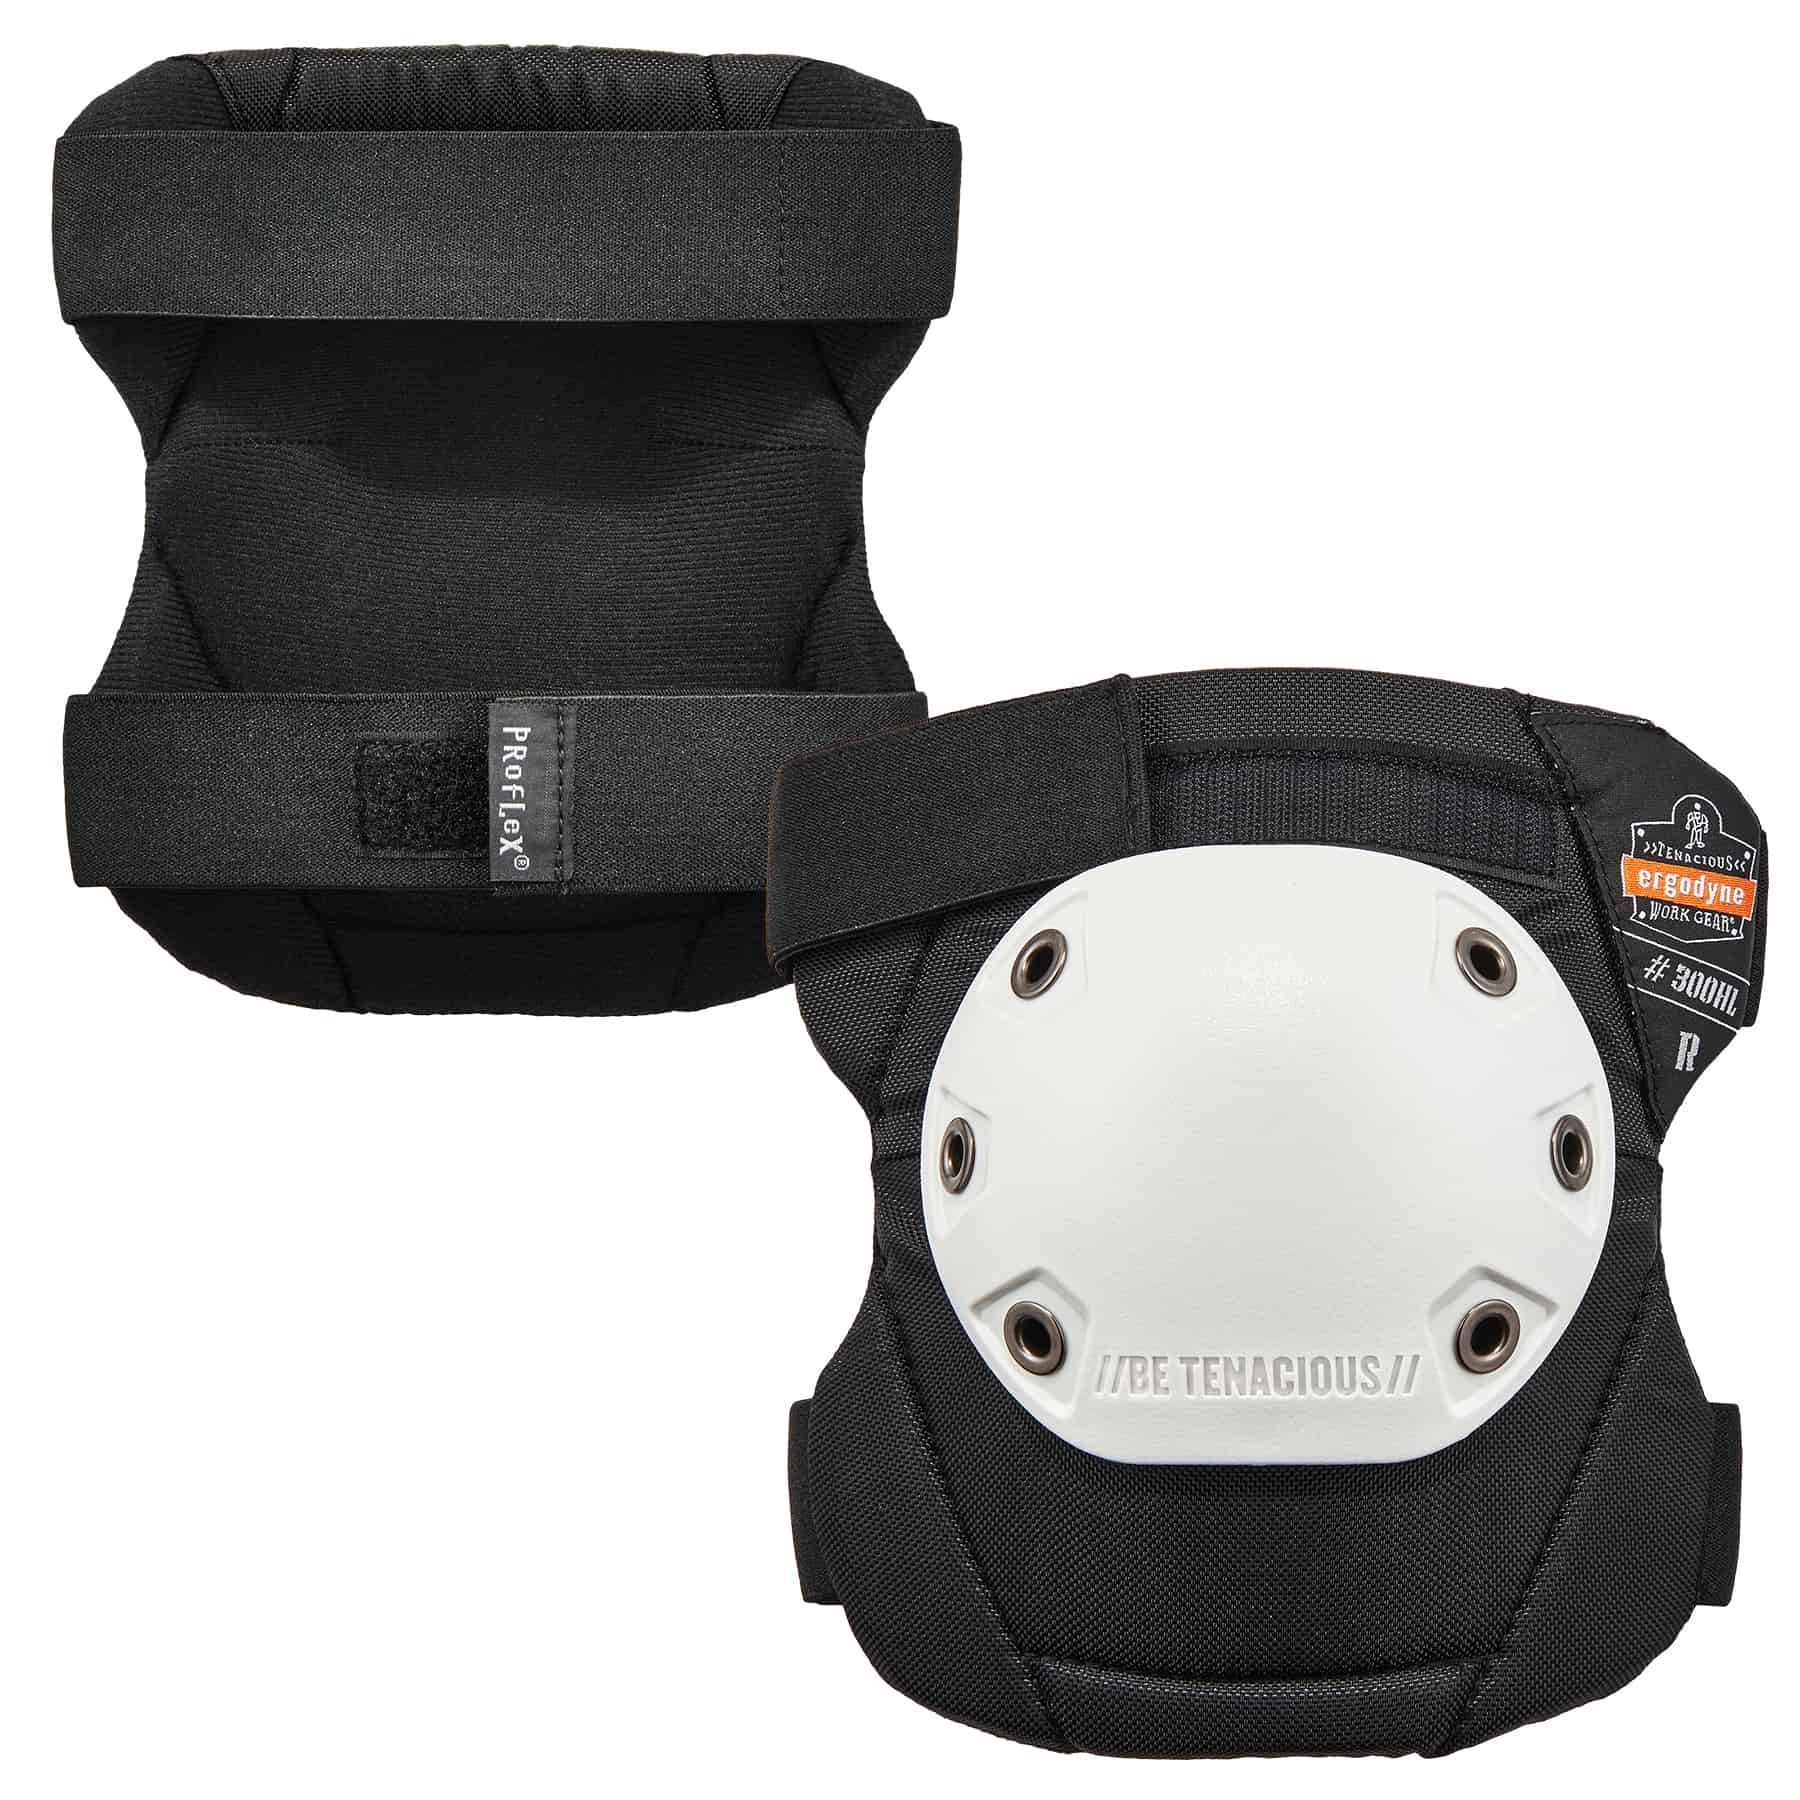 Rounded Cap Knee Pads - Hook and Loop - Knee Supports